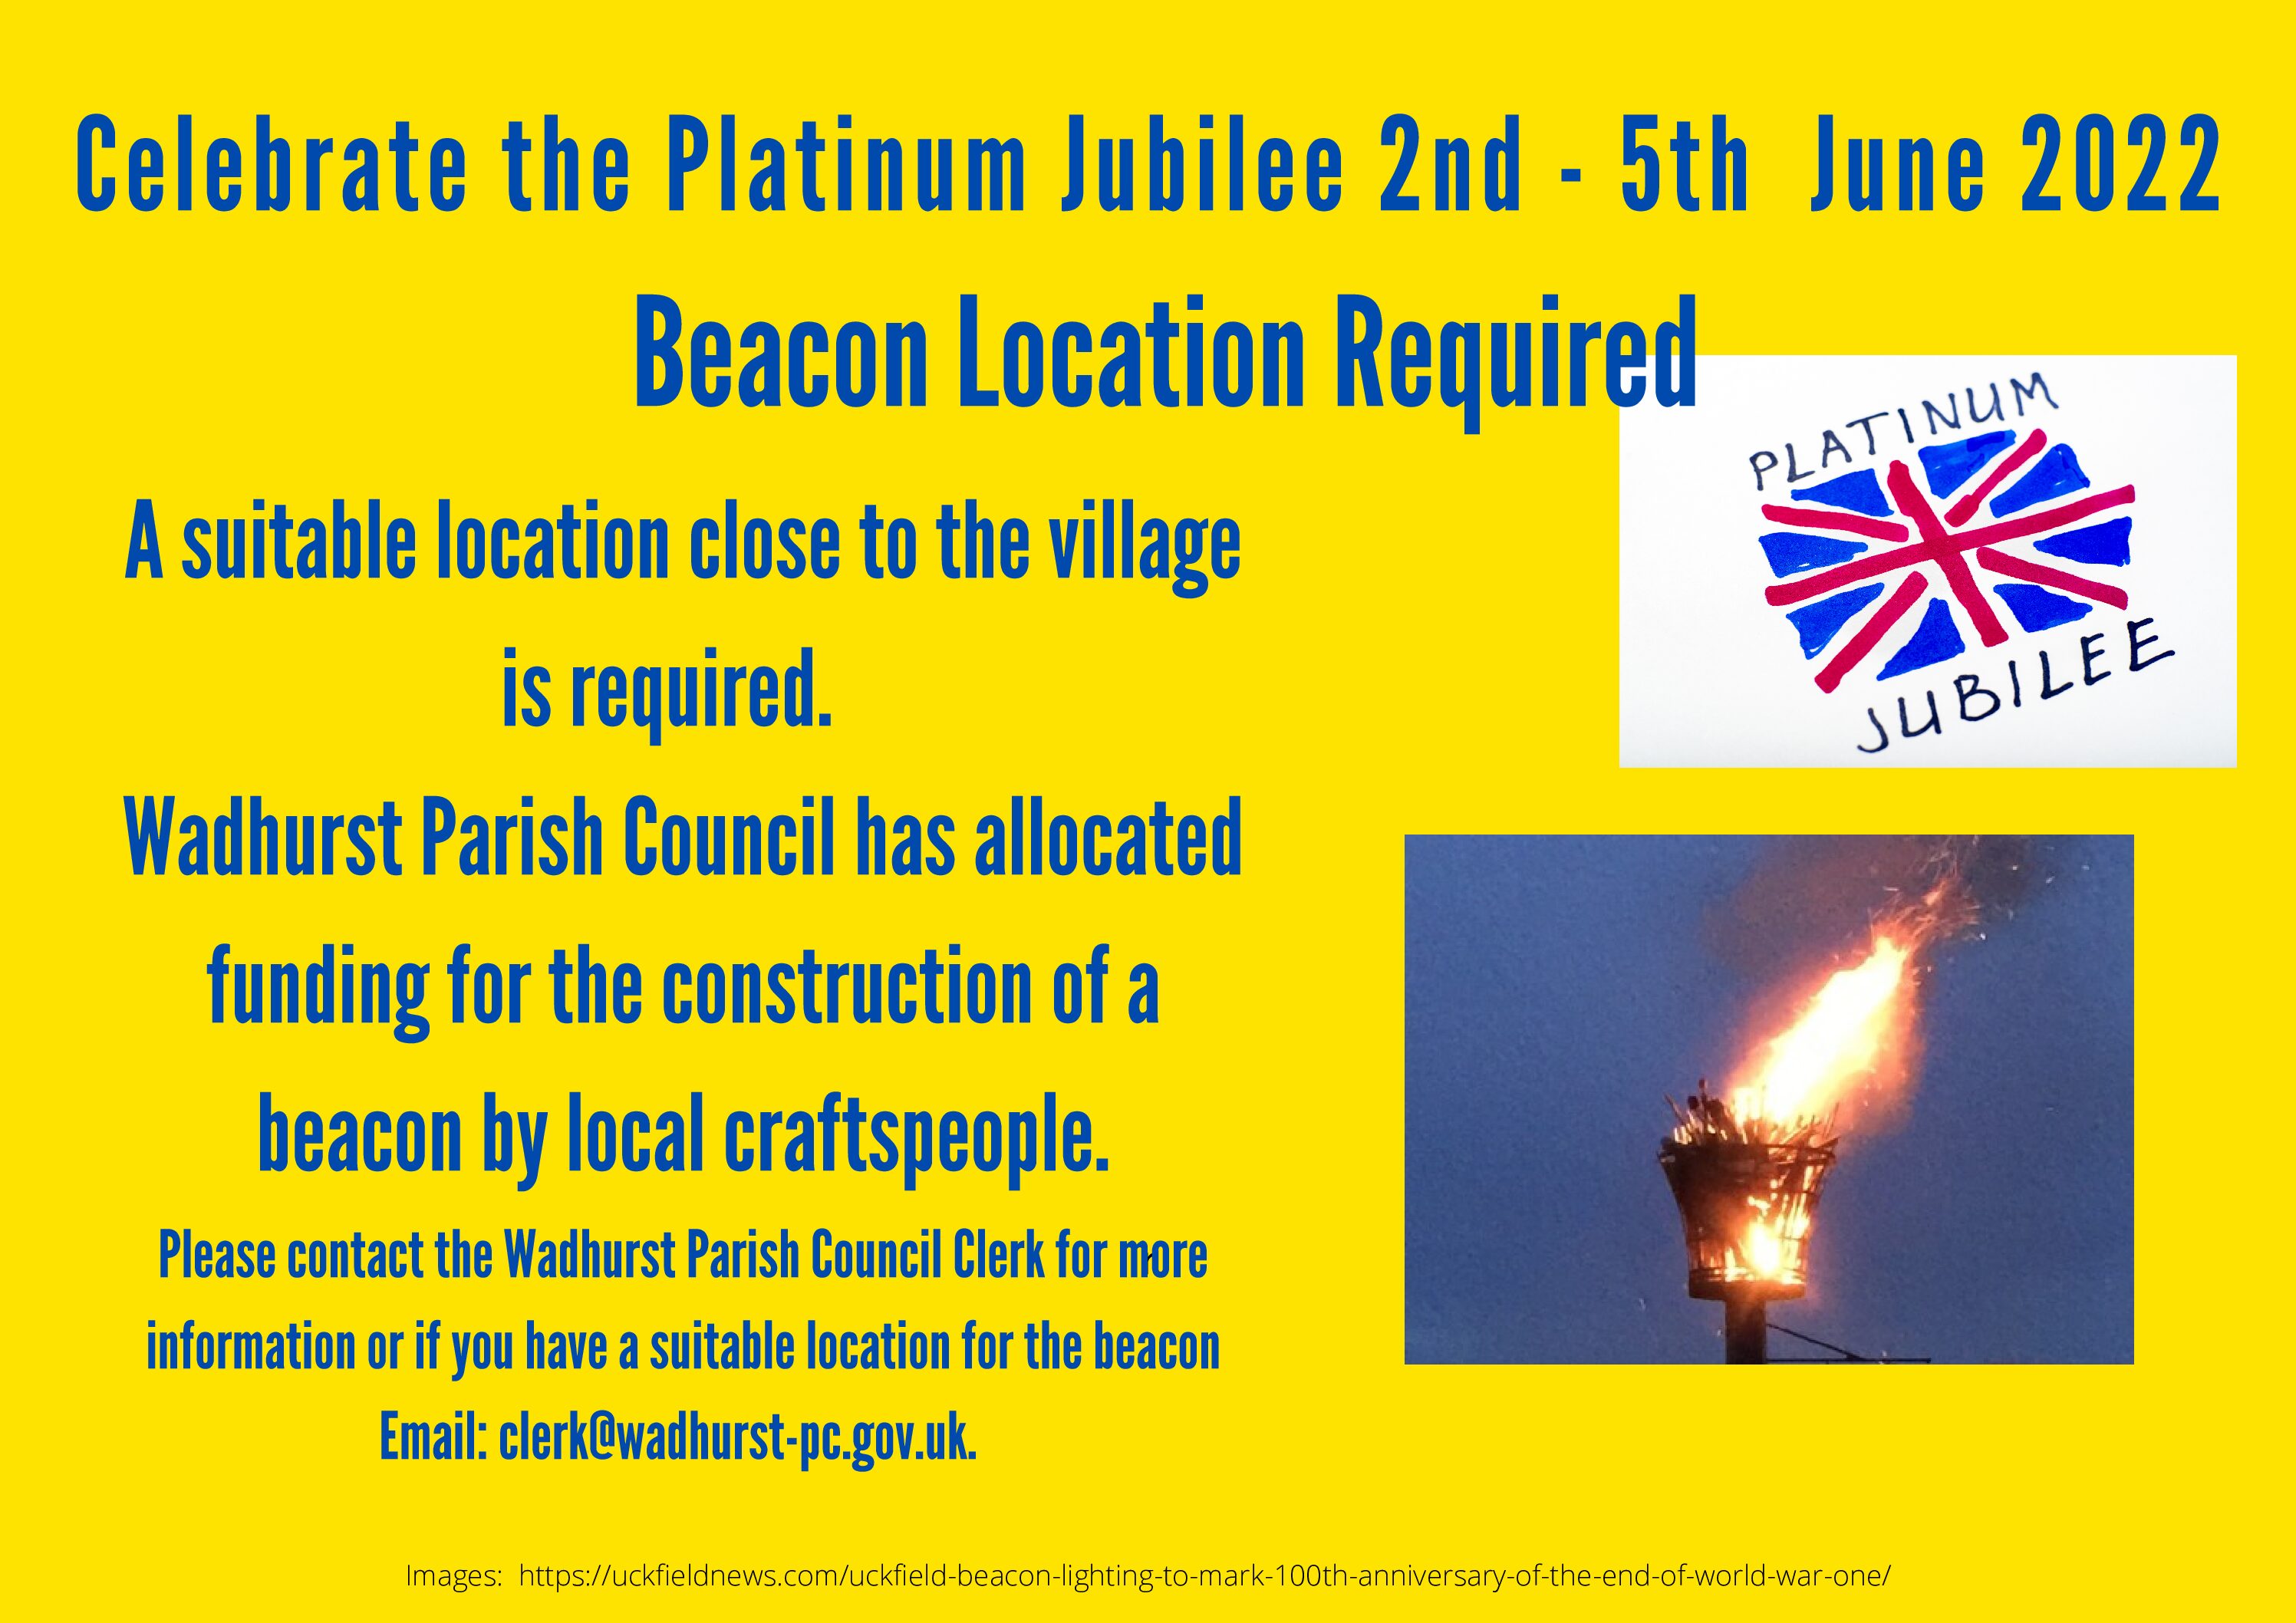 Beacon Location Required